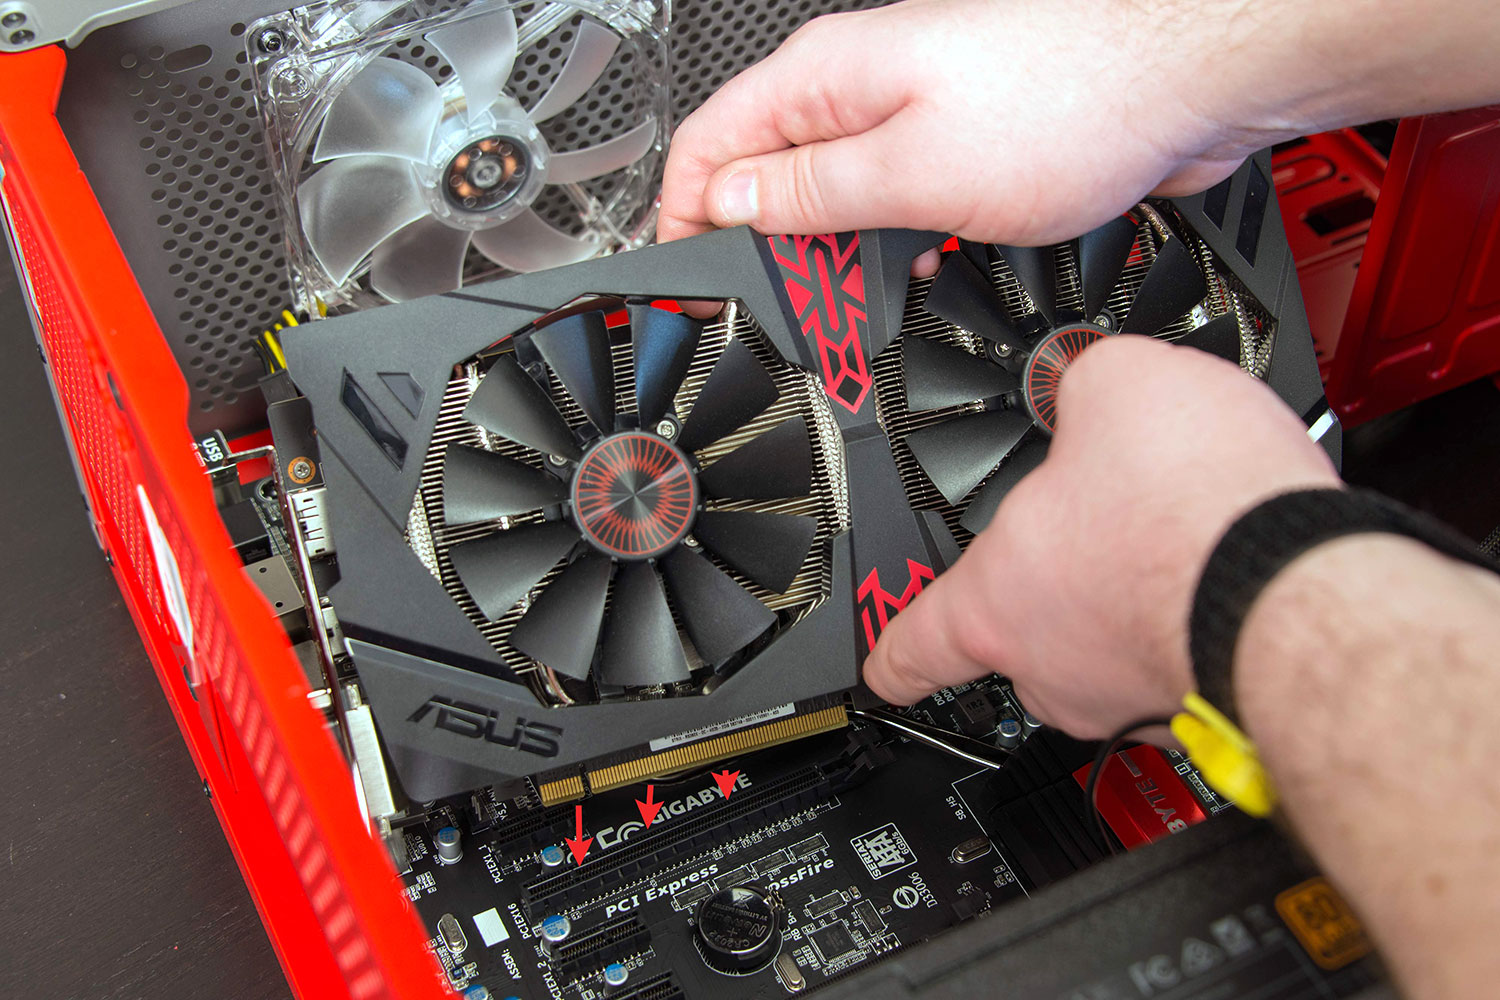 Installing a graphics card into the PCIe slot.